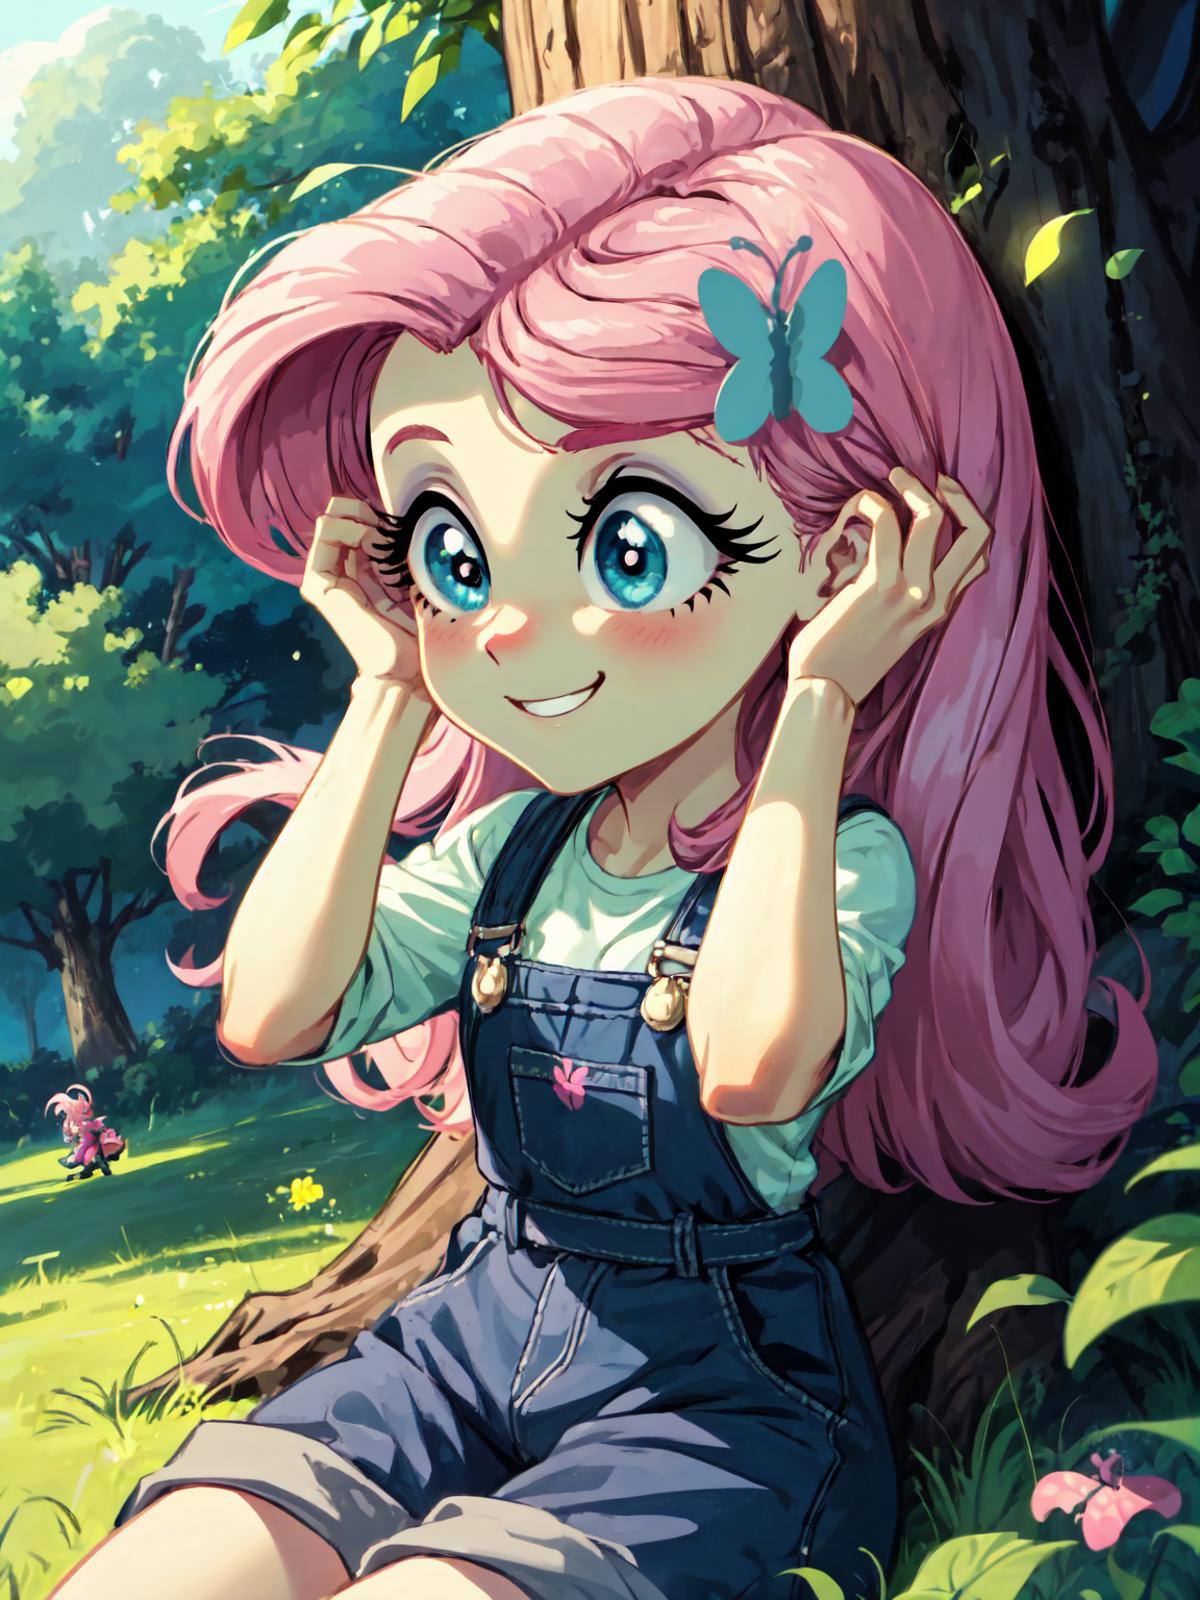 Fluttershy | My Little Pony / Equestria Girls image by neilarmstron12